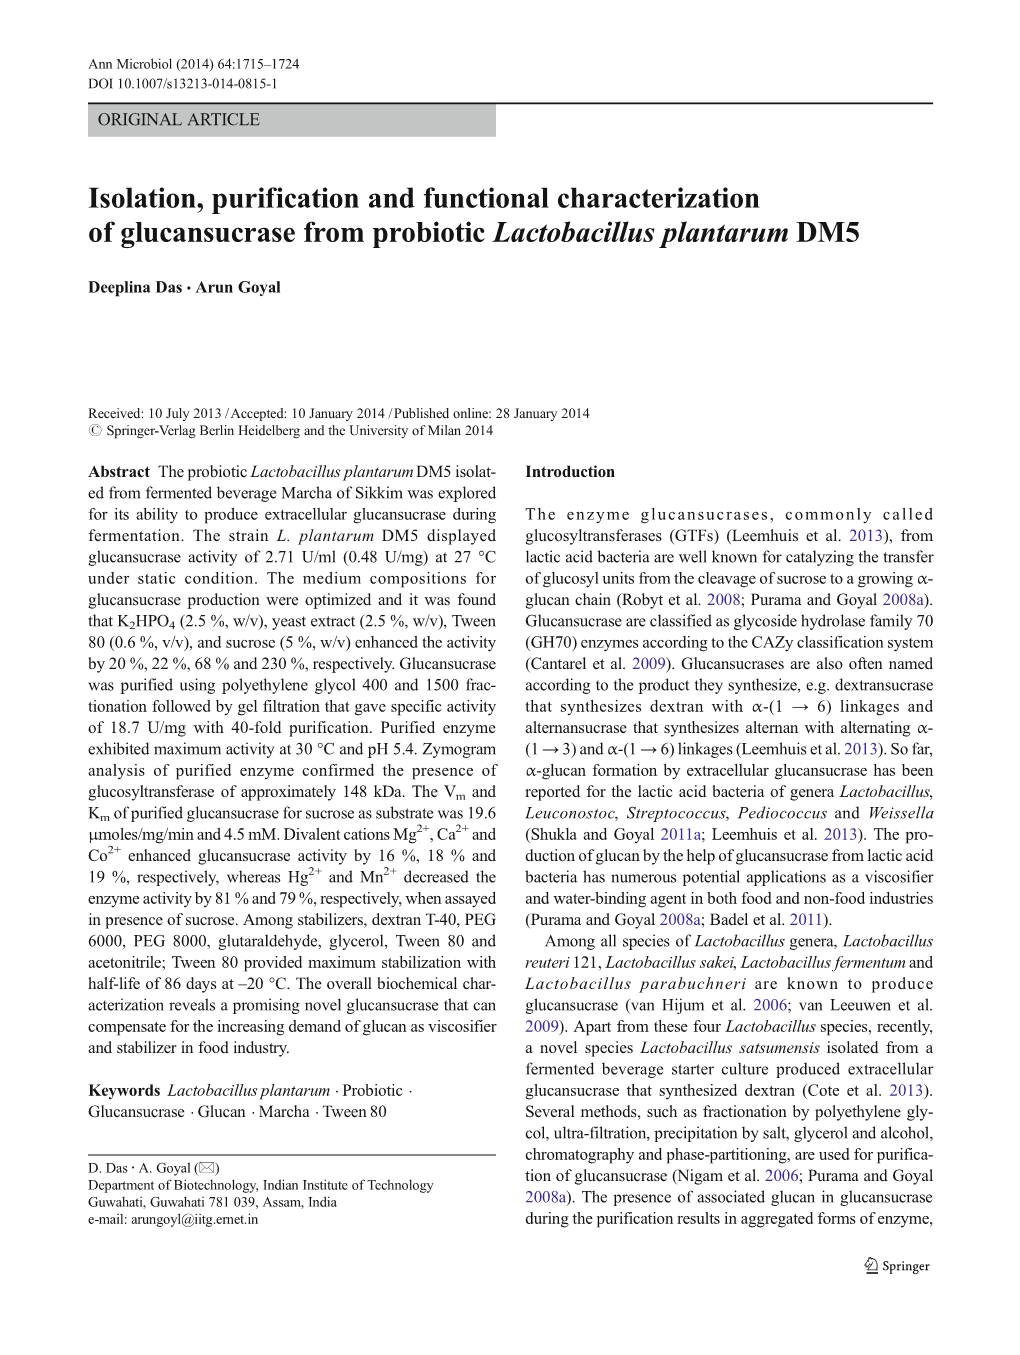 Isolation, Purification and Functional Characterization of Glucansucrase from Probiotic Lactobacillus Plantarum DM5